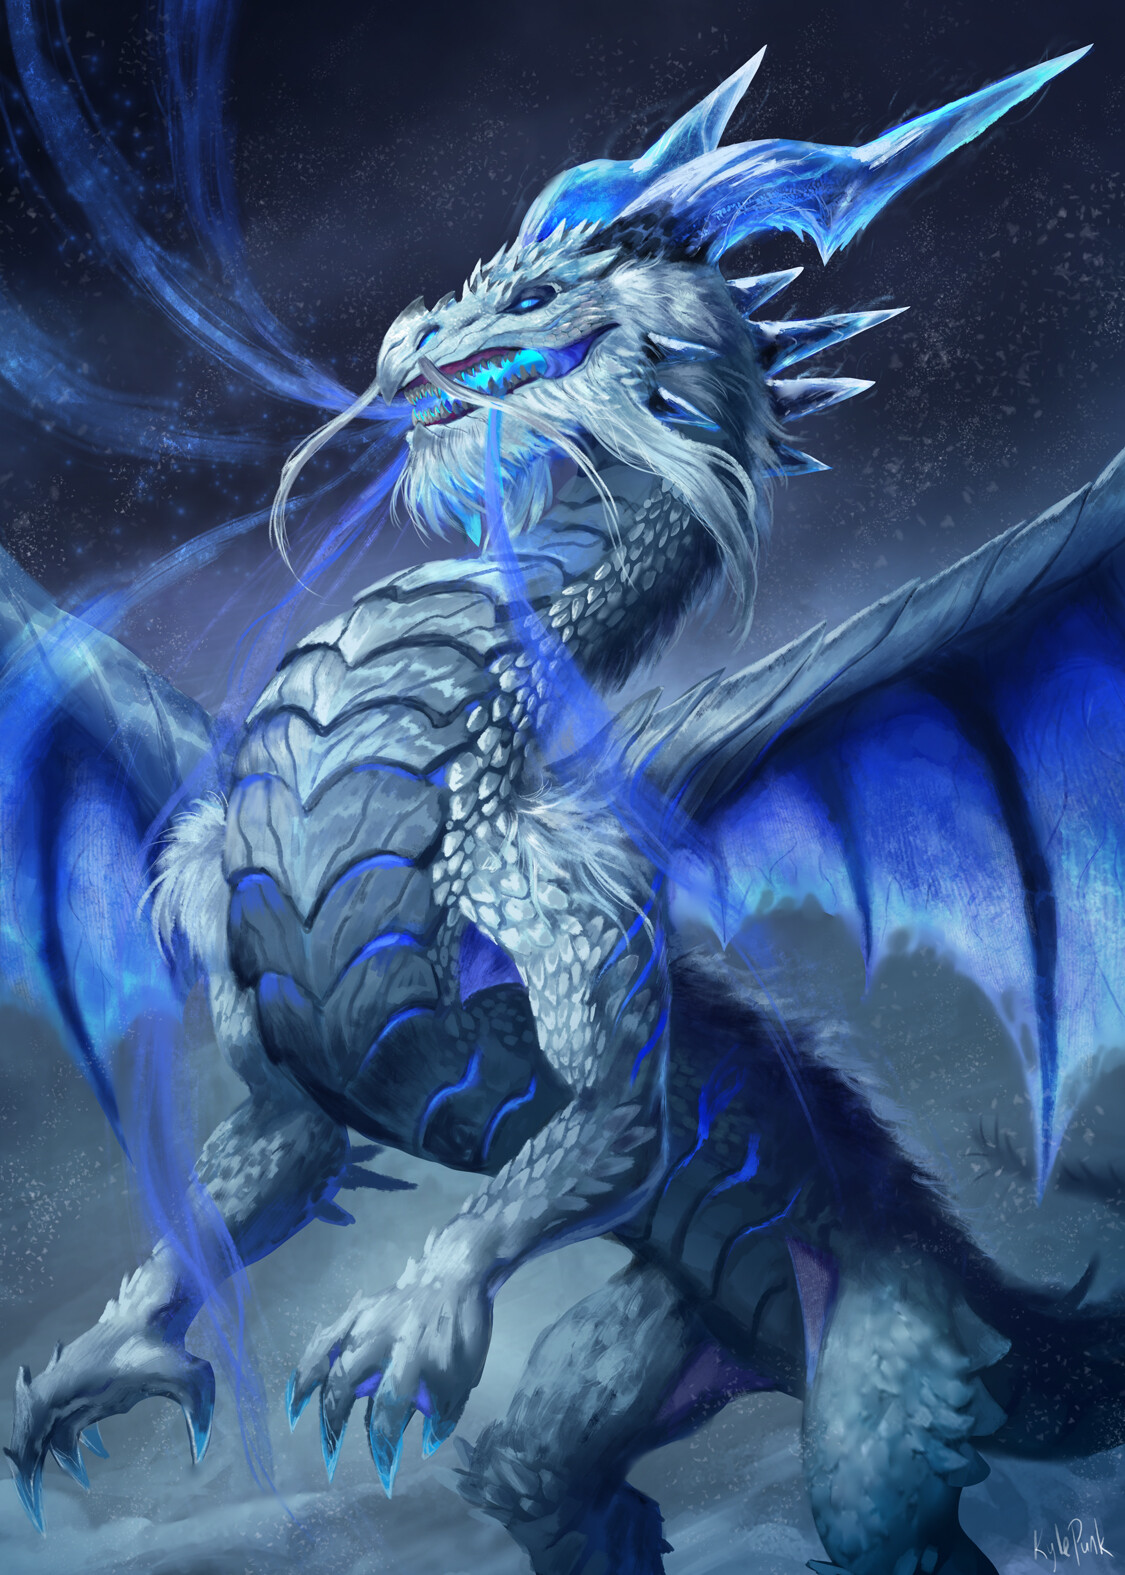 Blue-Eyes White Dragon (LOB booster box inspired) PC wallpapers. 2560x1600  / 2560x1440 / 1920x1080 sizes available. : r/DuelLinks